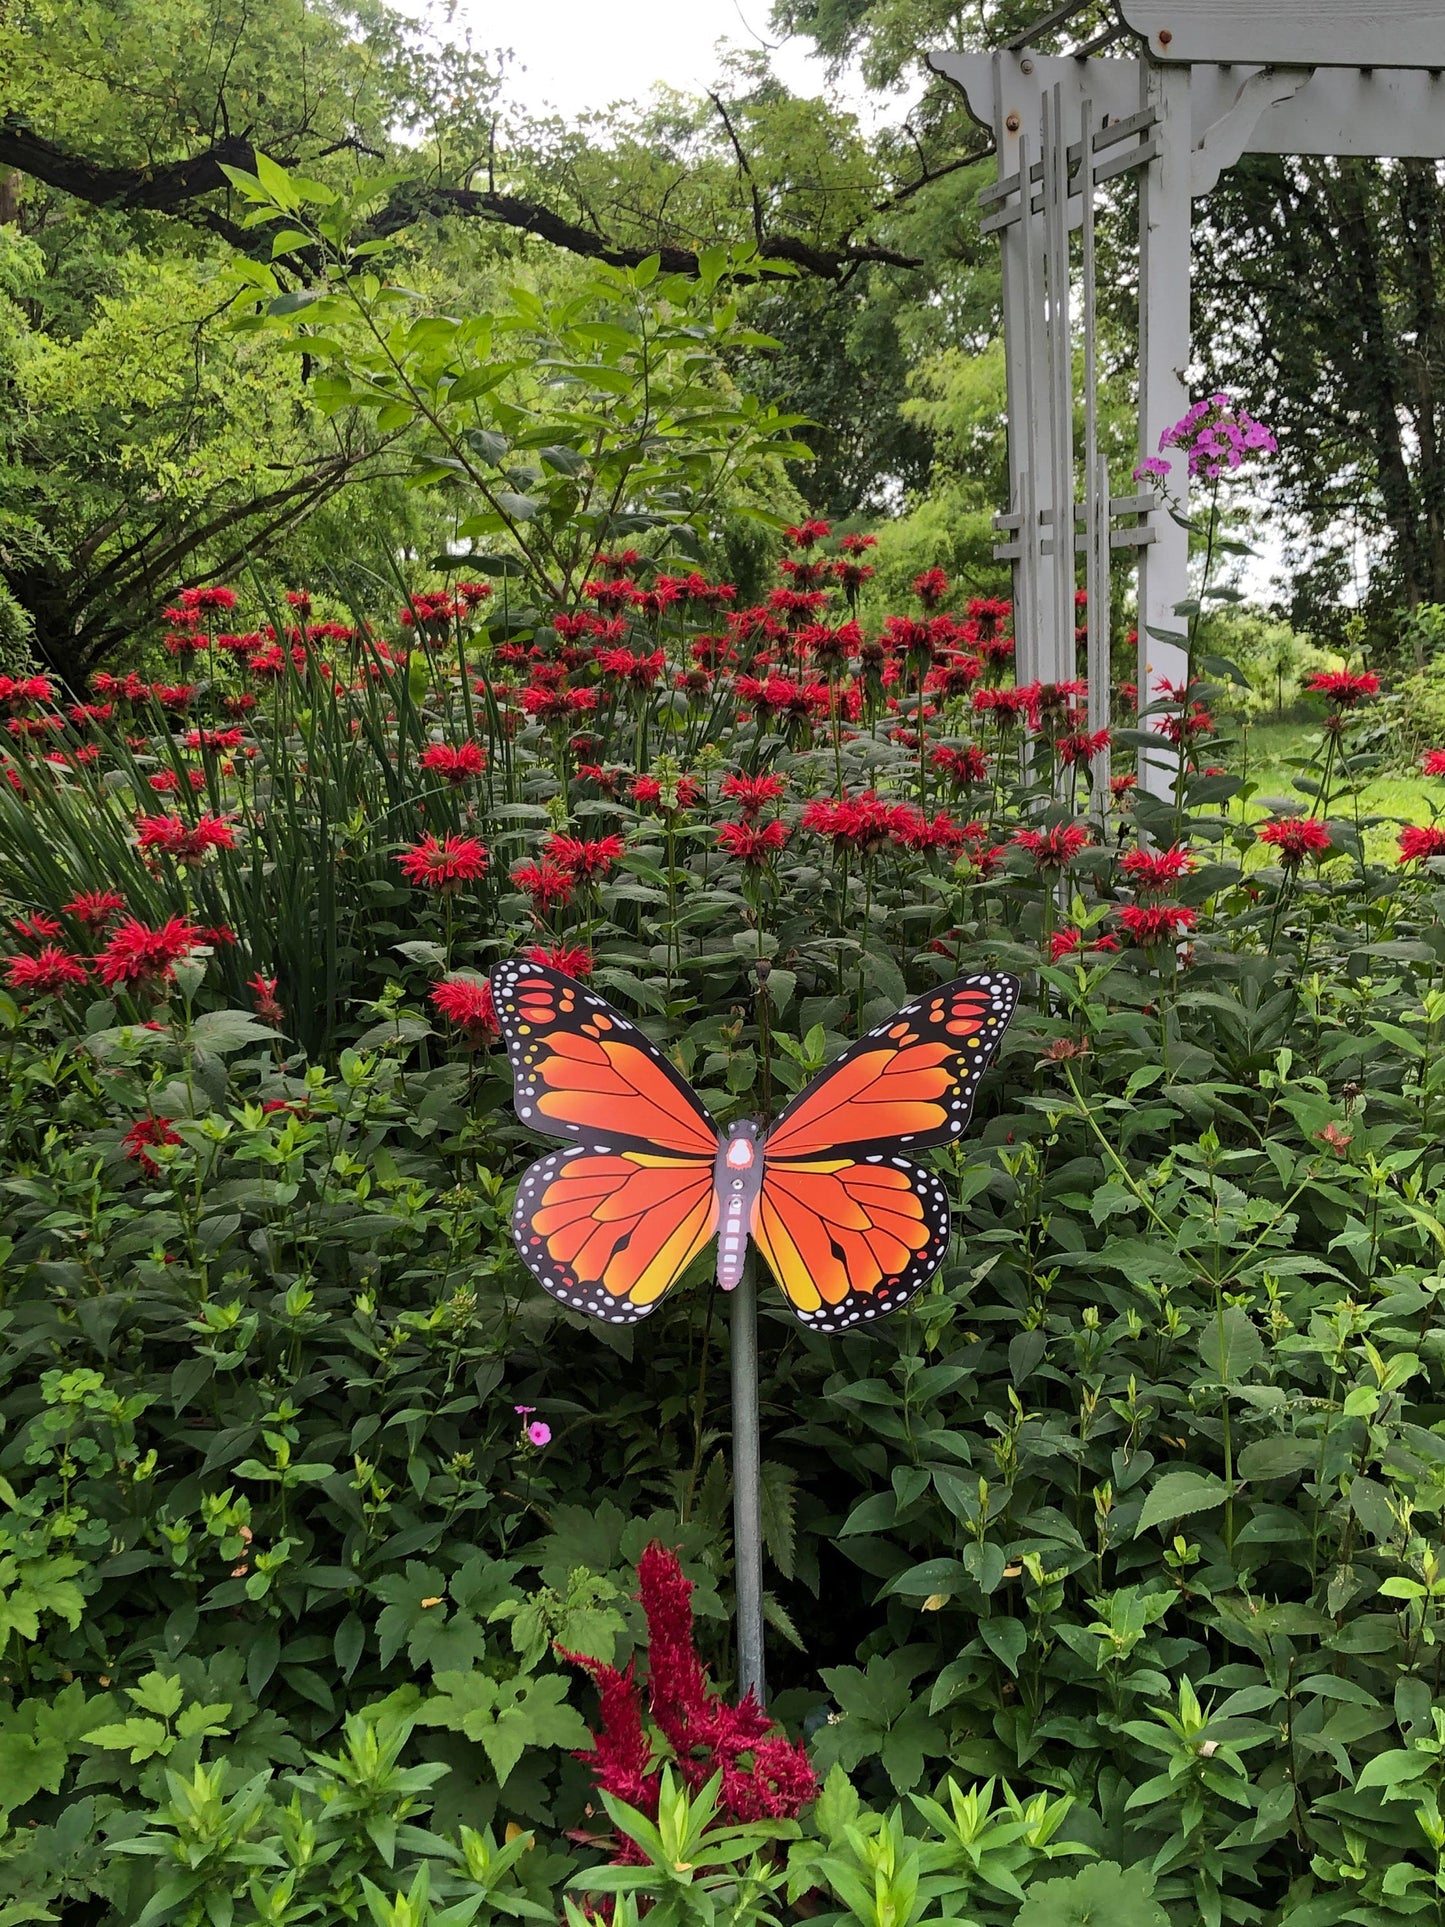 Butterfly Sticks -Large Butterfly Garden Art -Monarch, Blue Morpho and more. Aluminum Skin w/ Plastic Core - NEVER RUSTS - Lasts Years!